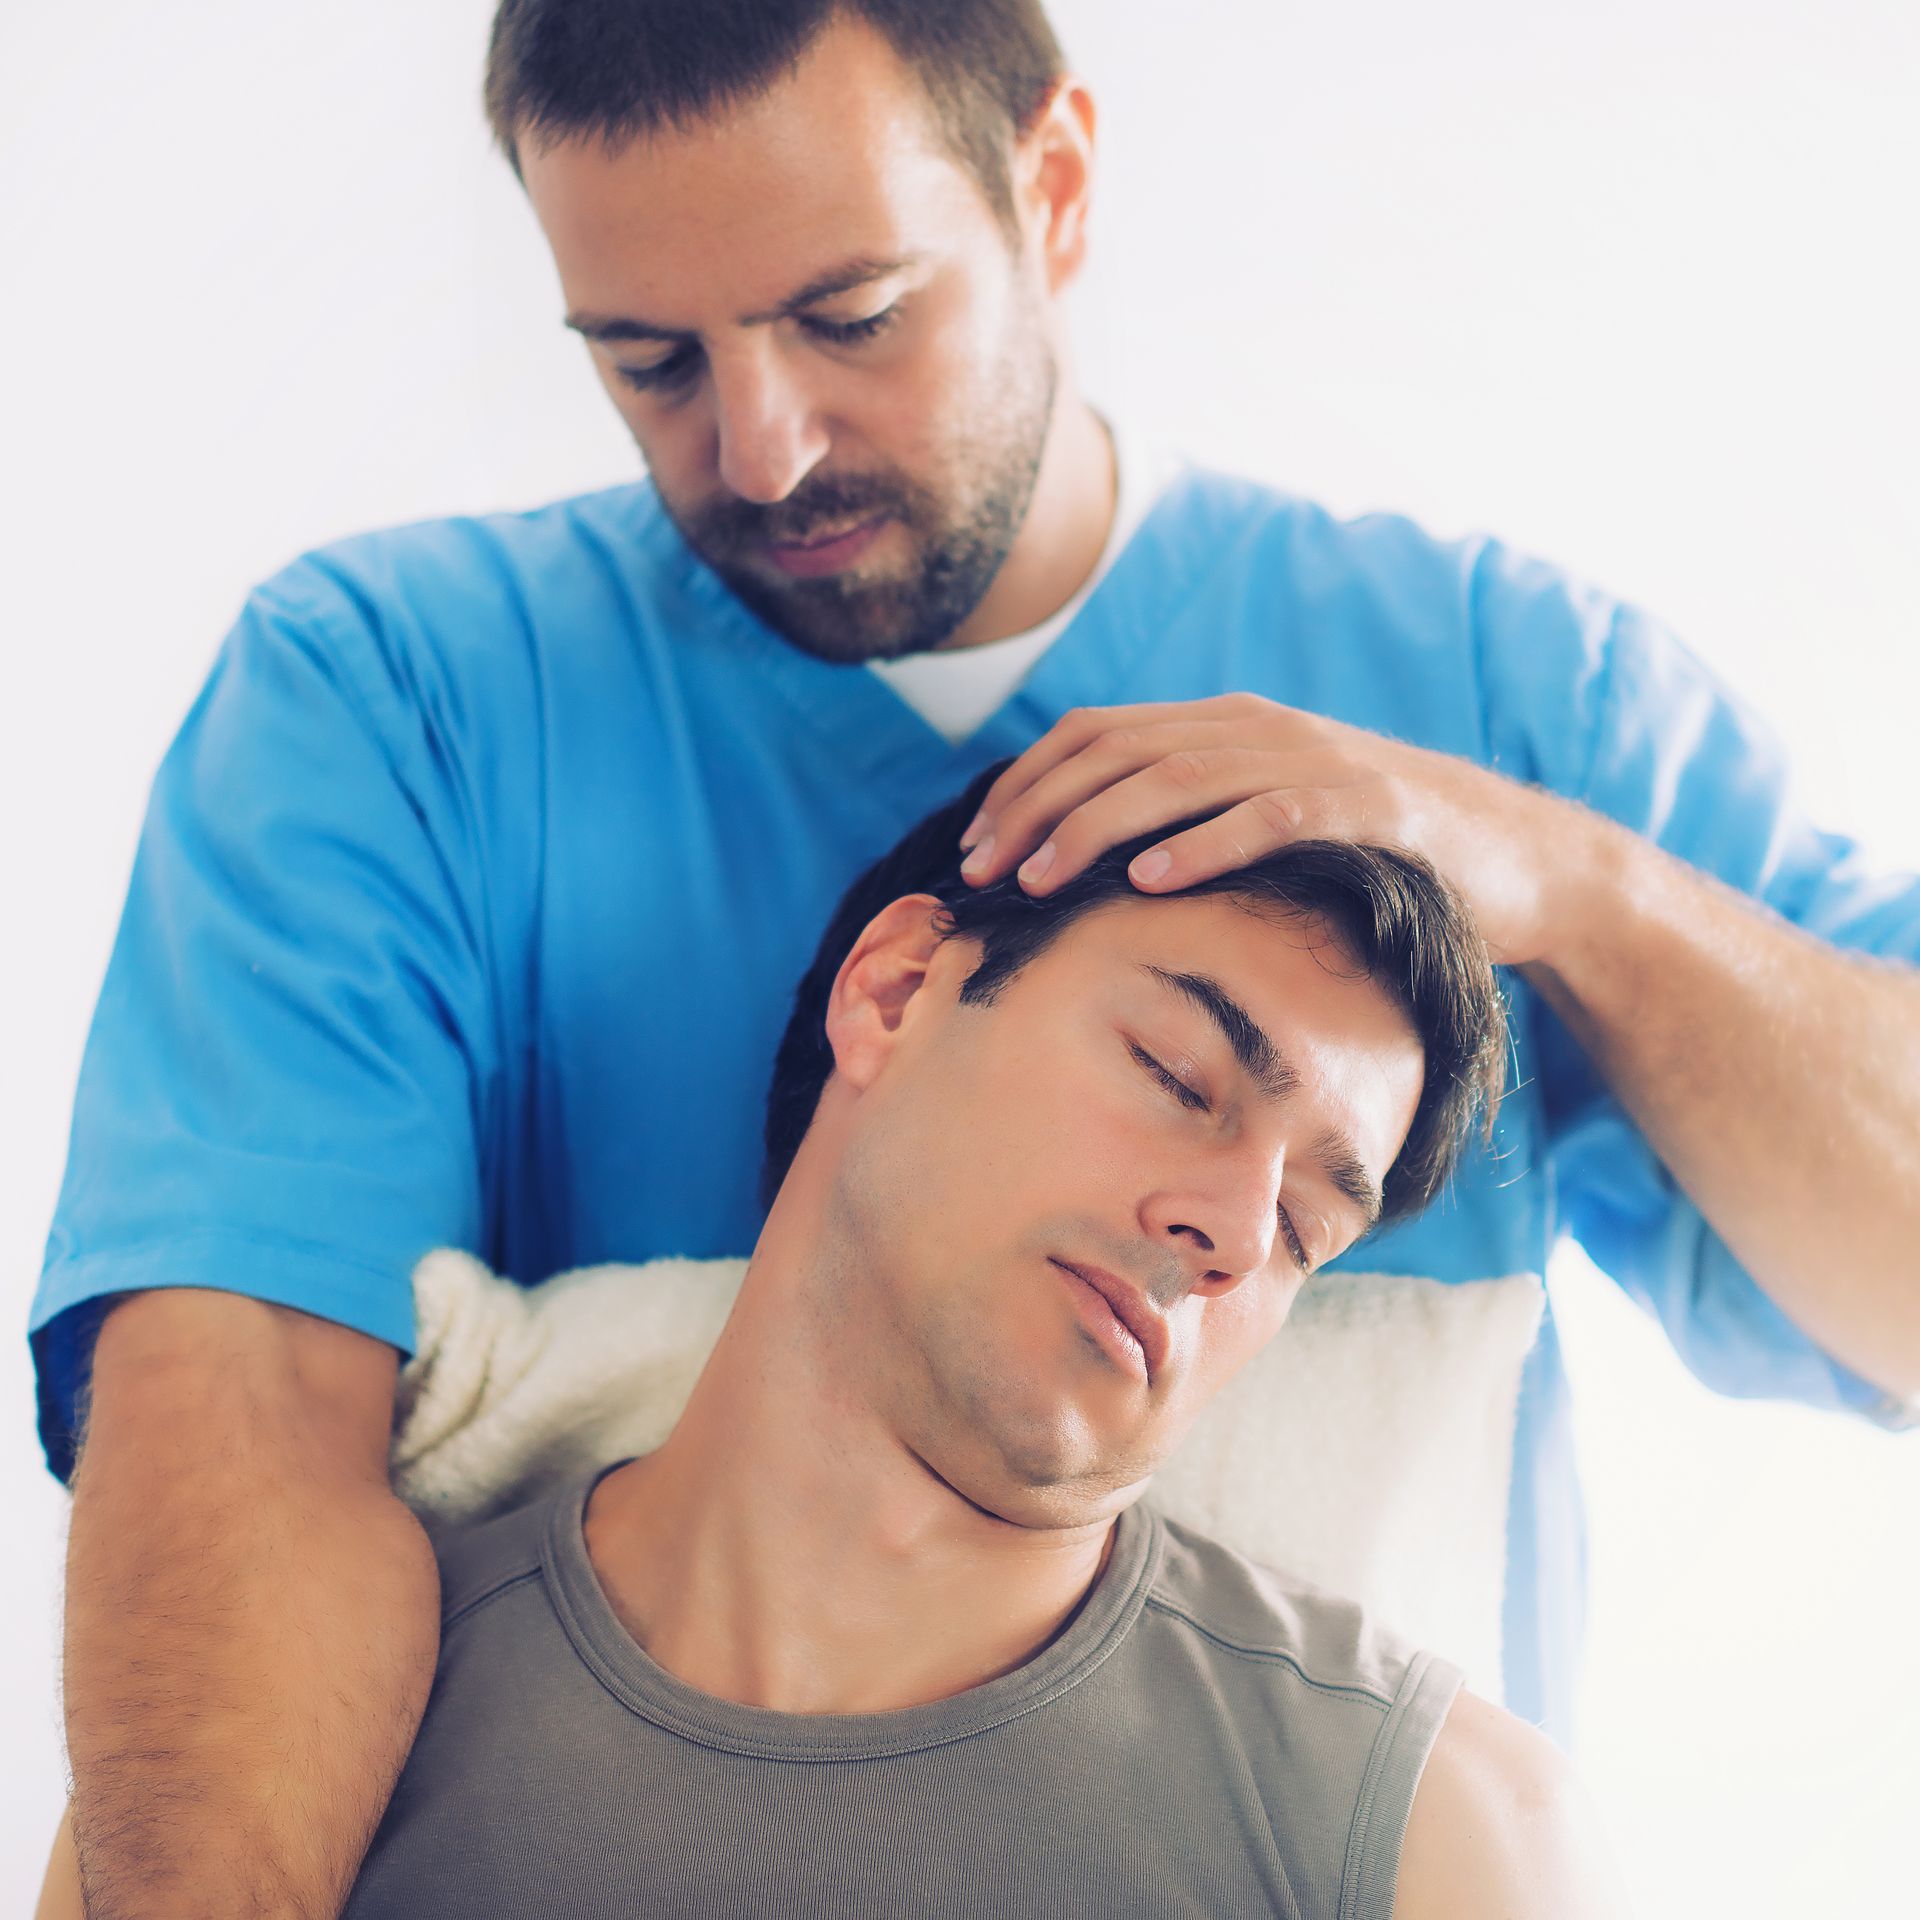 a man gets a neck adjustment from a chiropractor after a workout